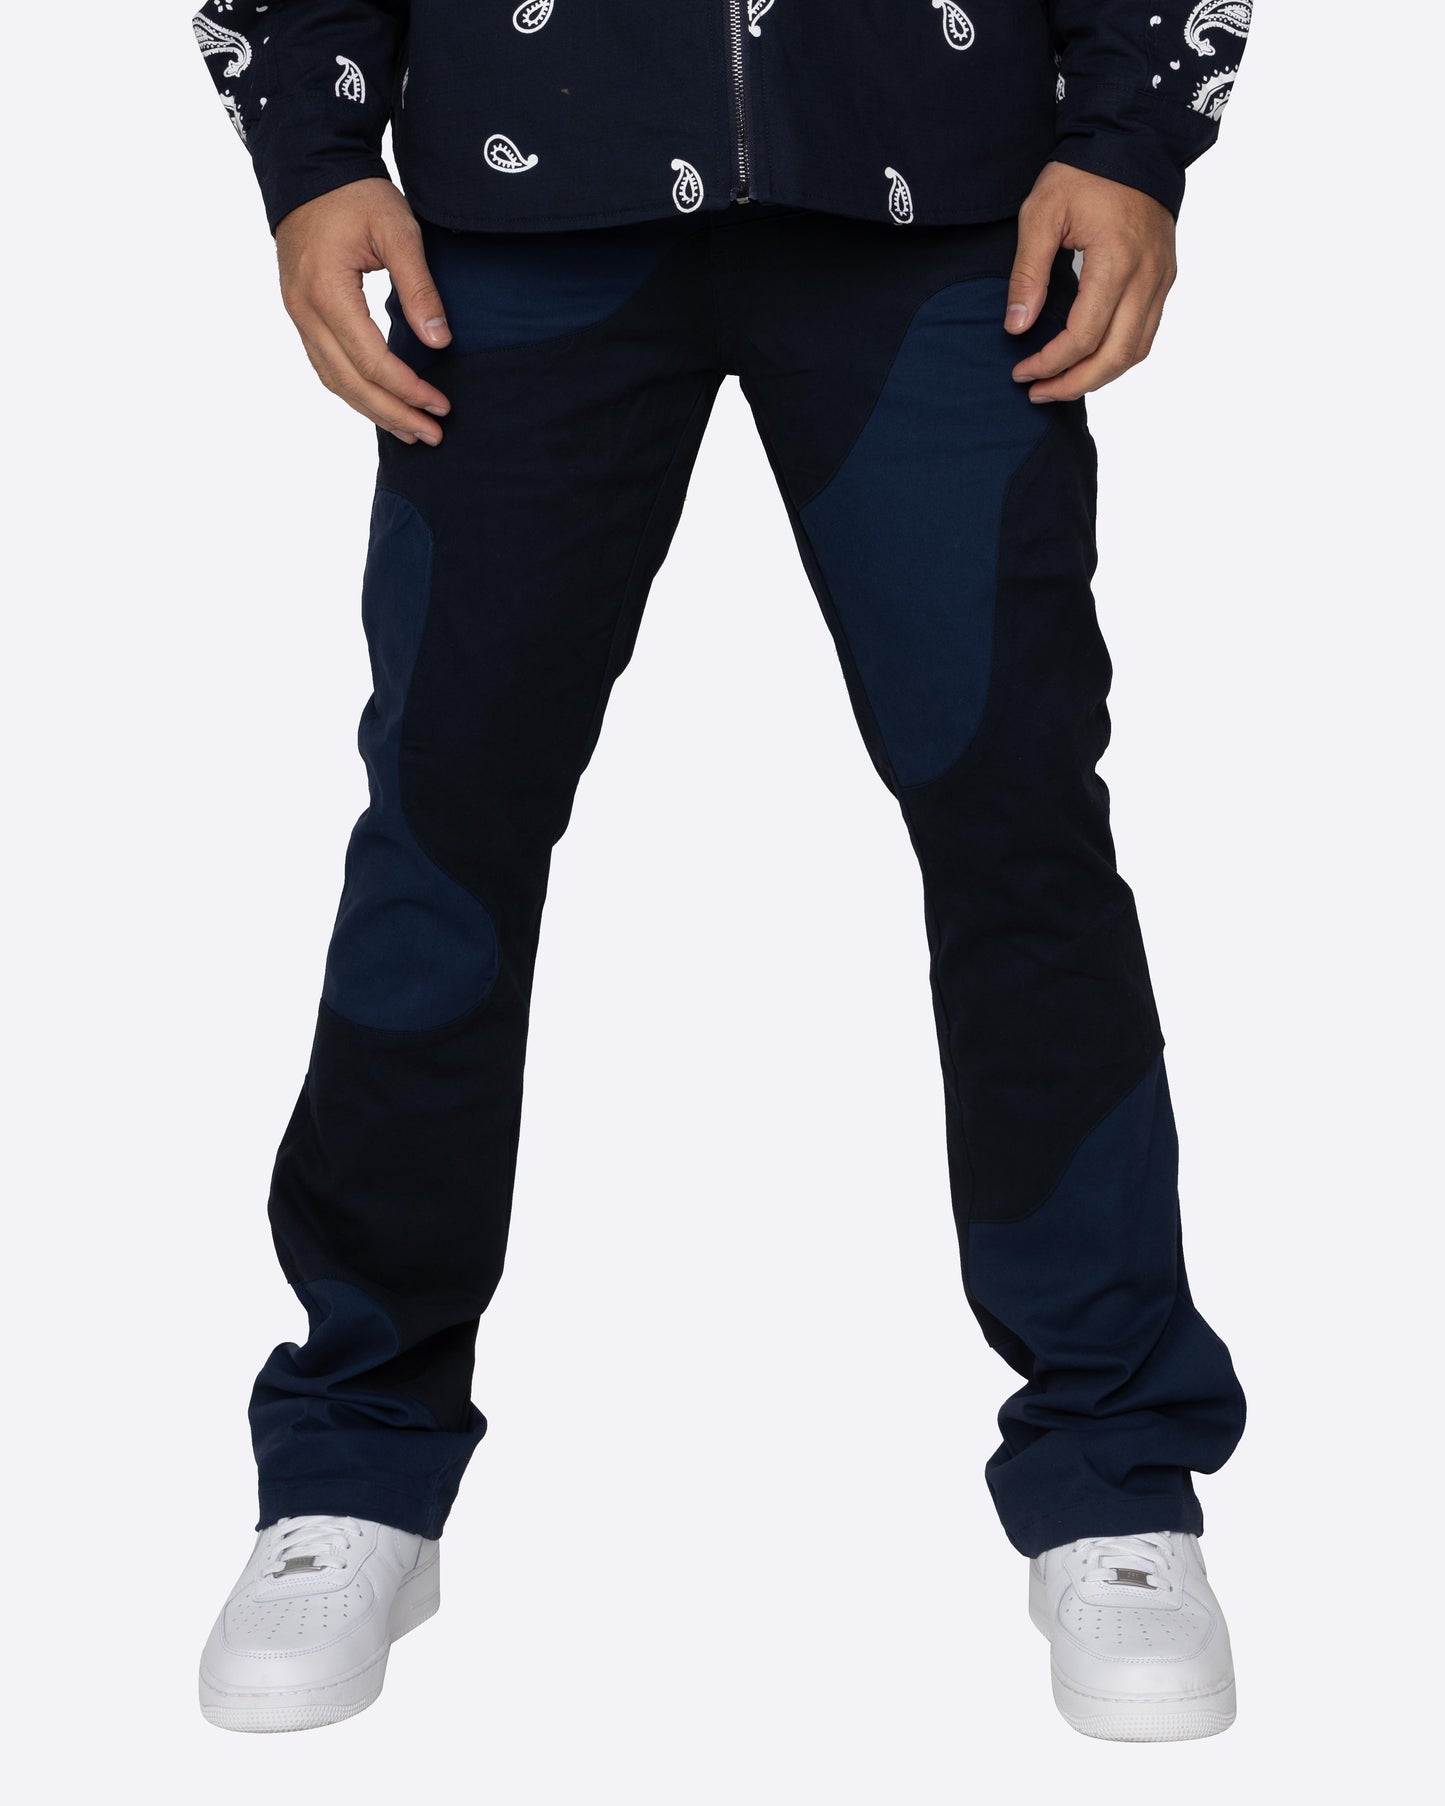 DAVE EAST MARBLE PANTS-BLUE/BLUE